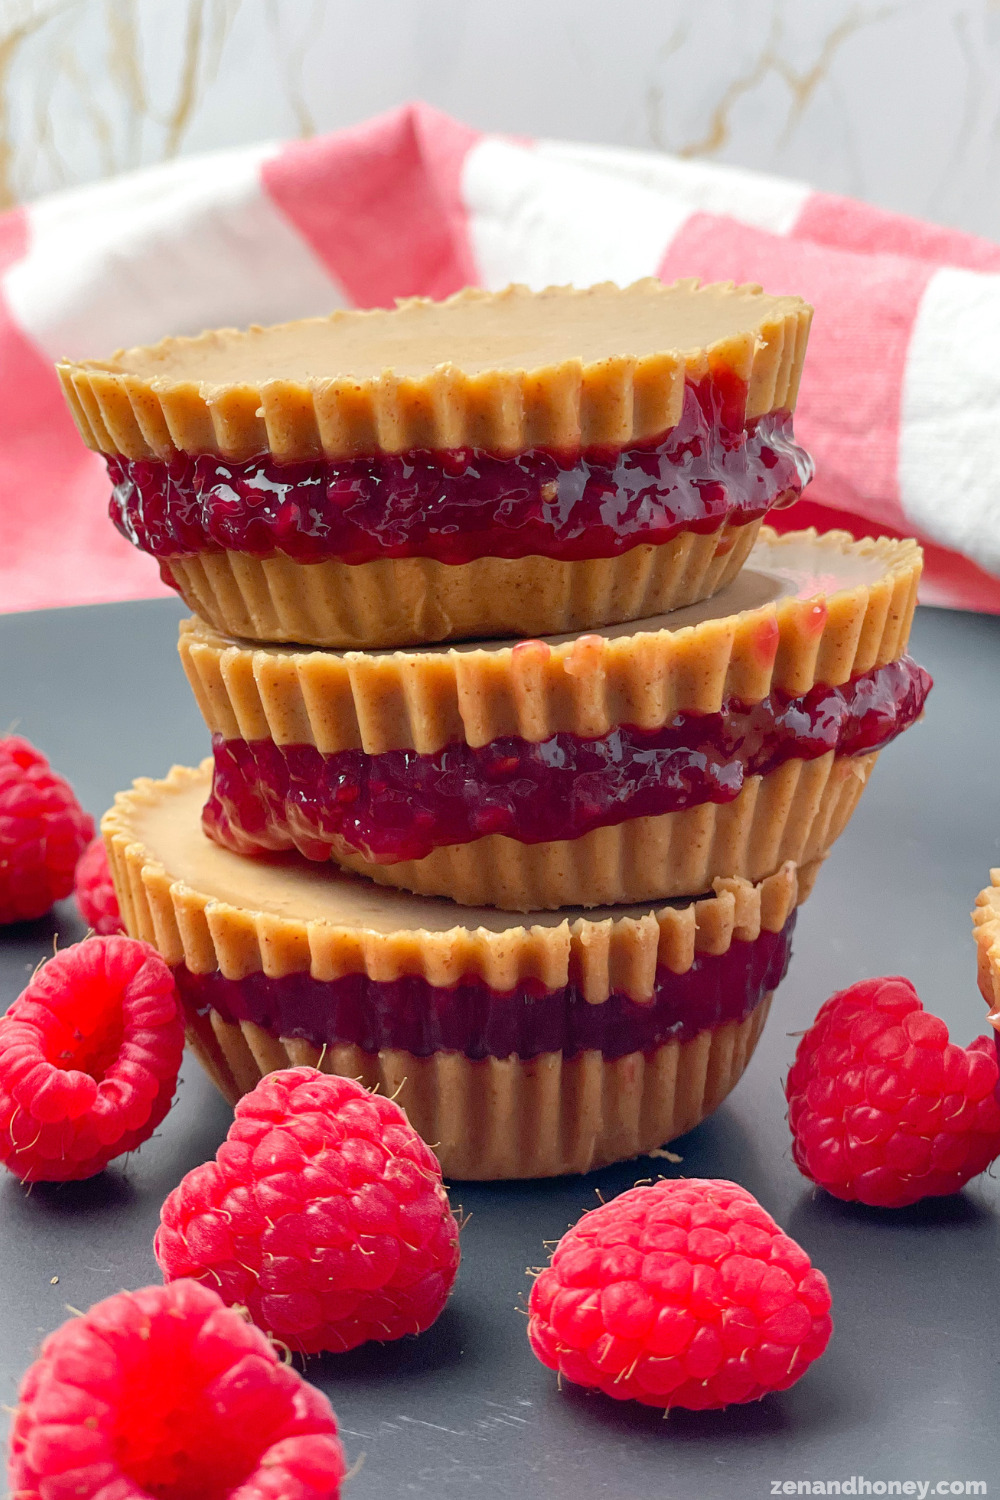 Peanut Butter And Jelly Cups - ZEN AND HONEY